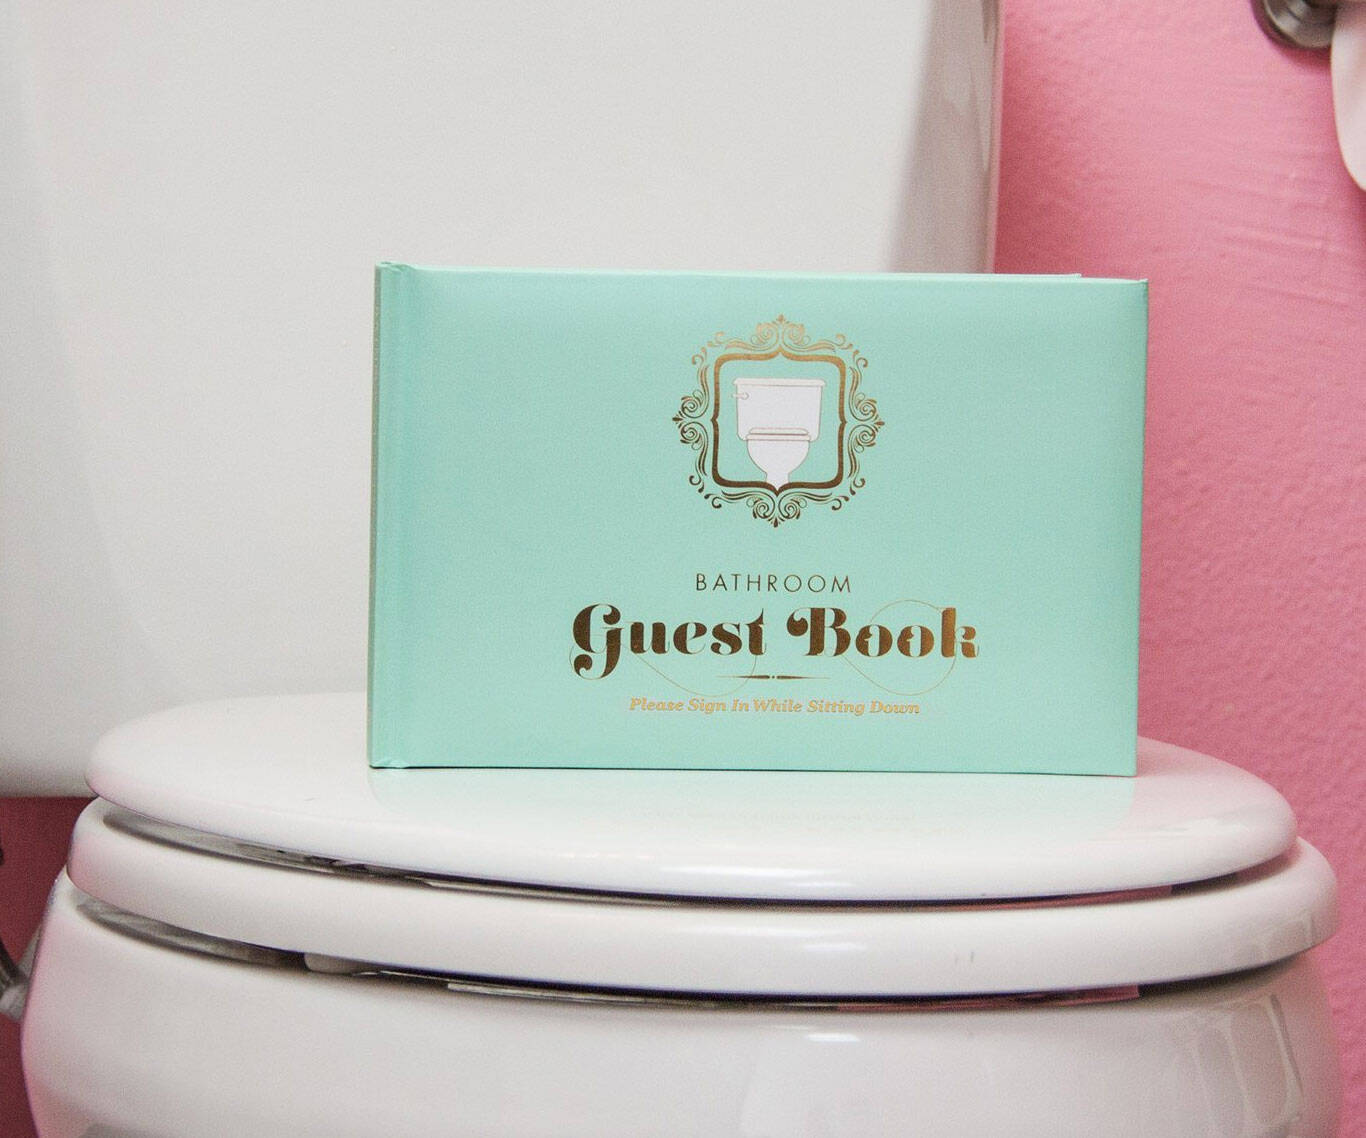 The Bathroom Guest Book - //coolthings.us